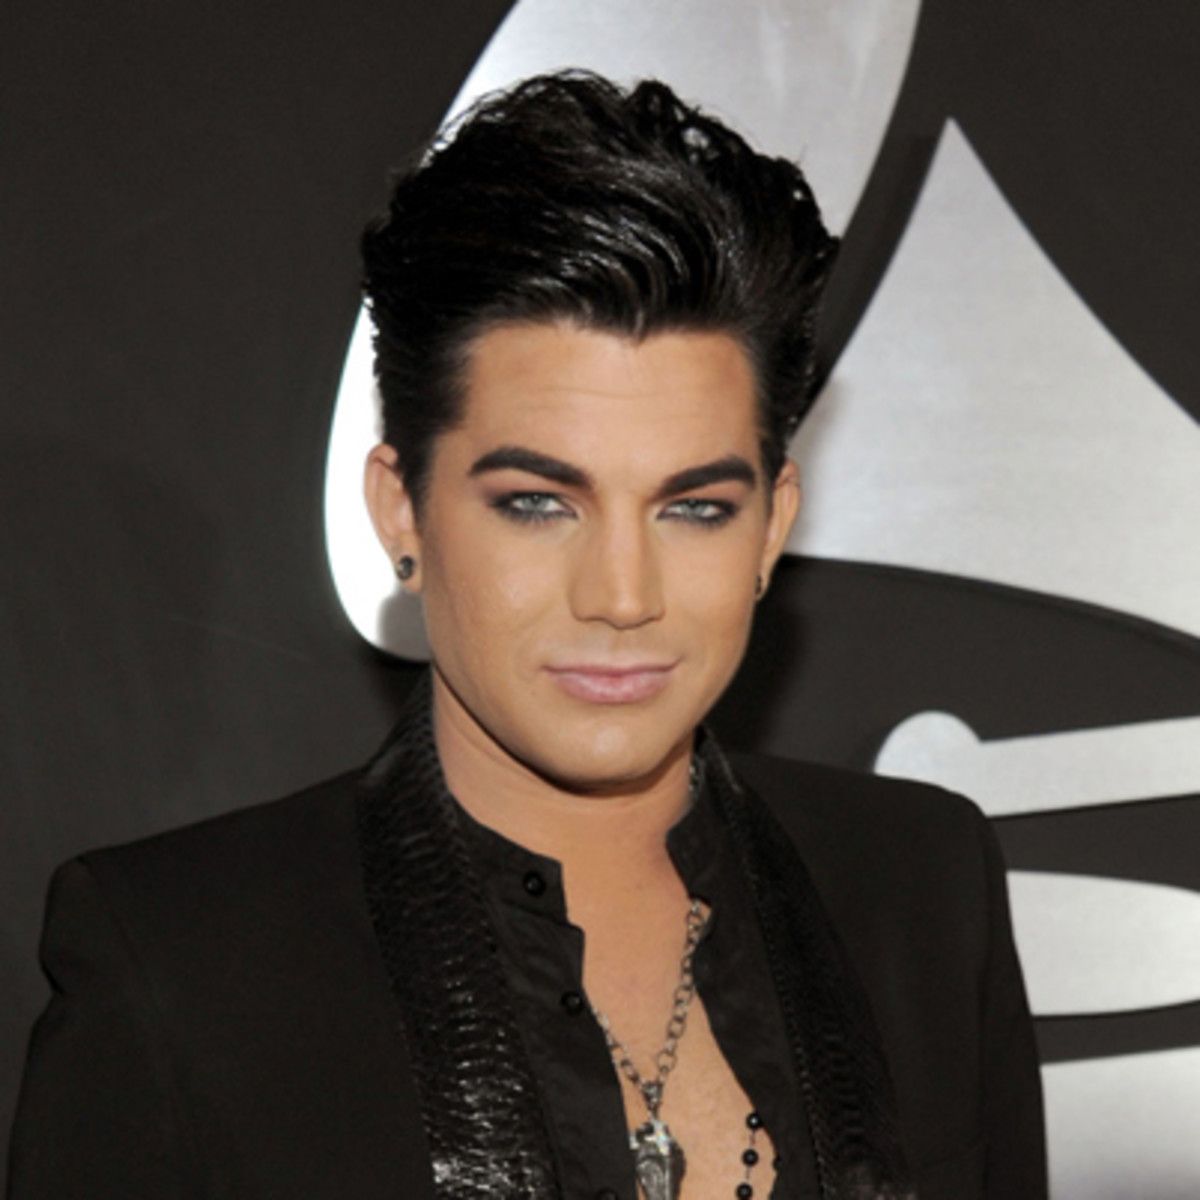 Adam Lambert wearing a black shirt and necklace at the Grammys.